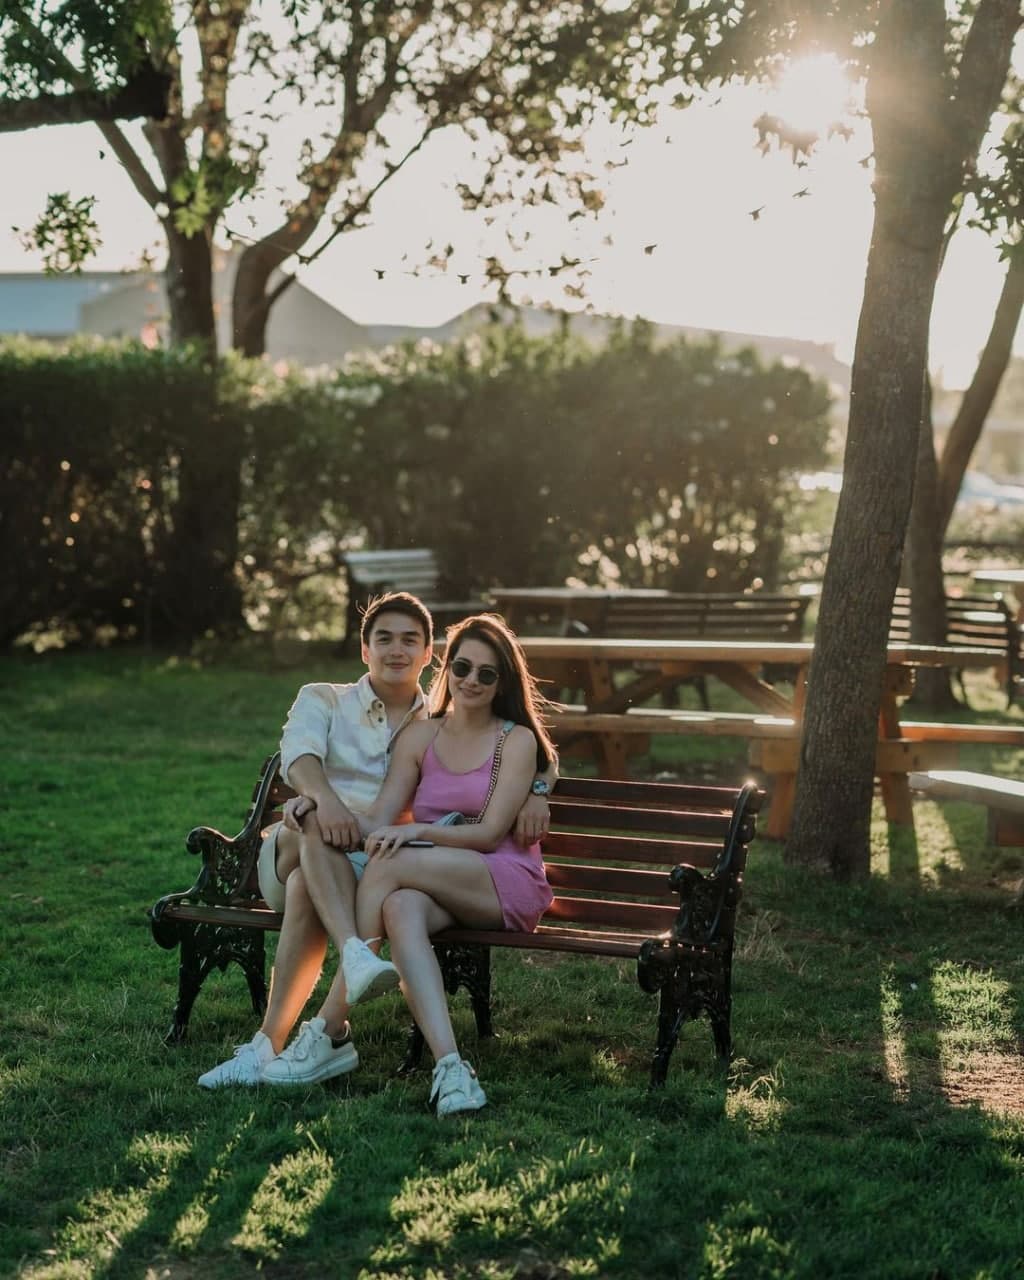 Dominic Roque and Bea Alonzo sitting on a bench in Napa California